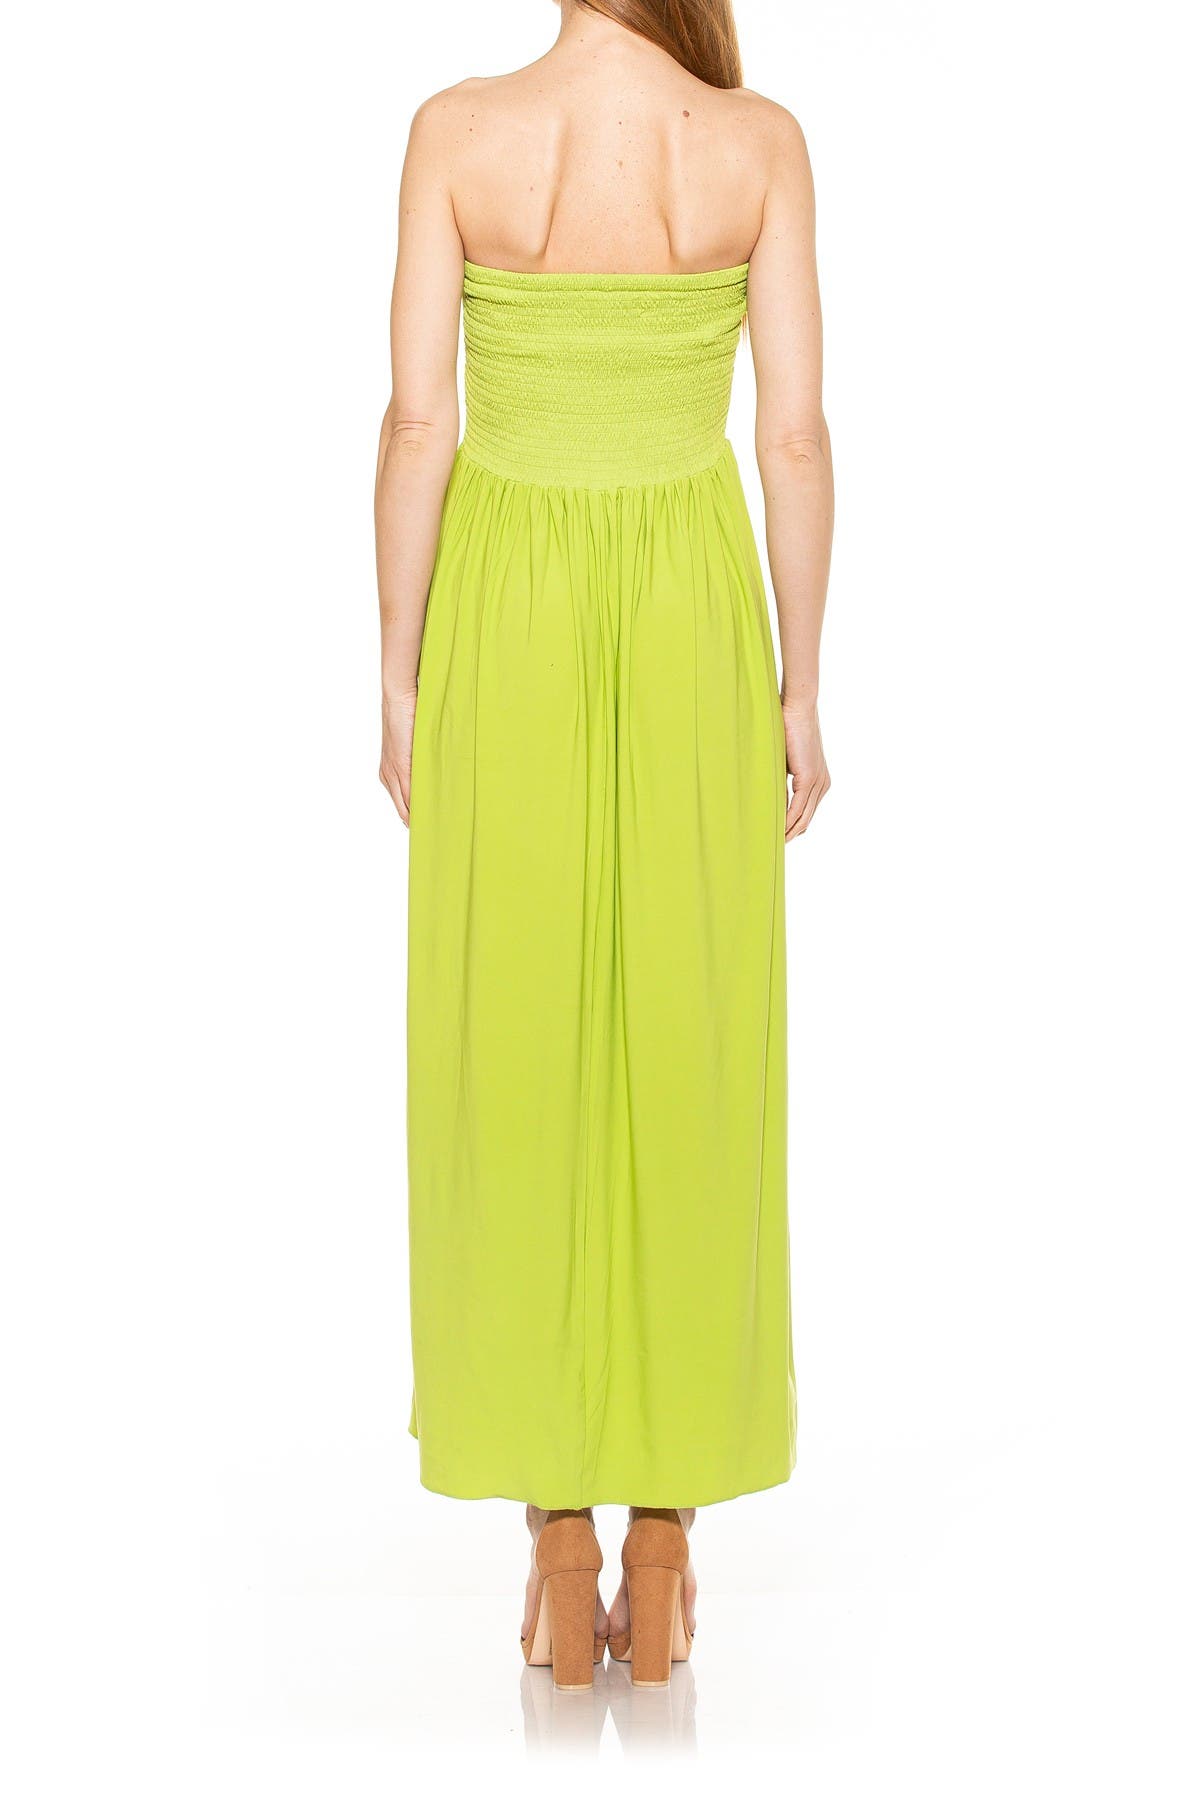 Alexia Admor Emmy Strapless Smocked Maxi Dress In Open Green48